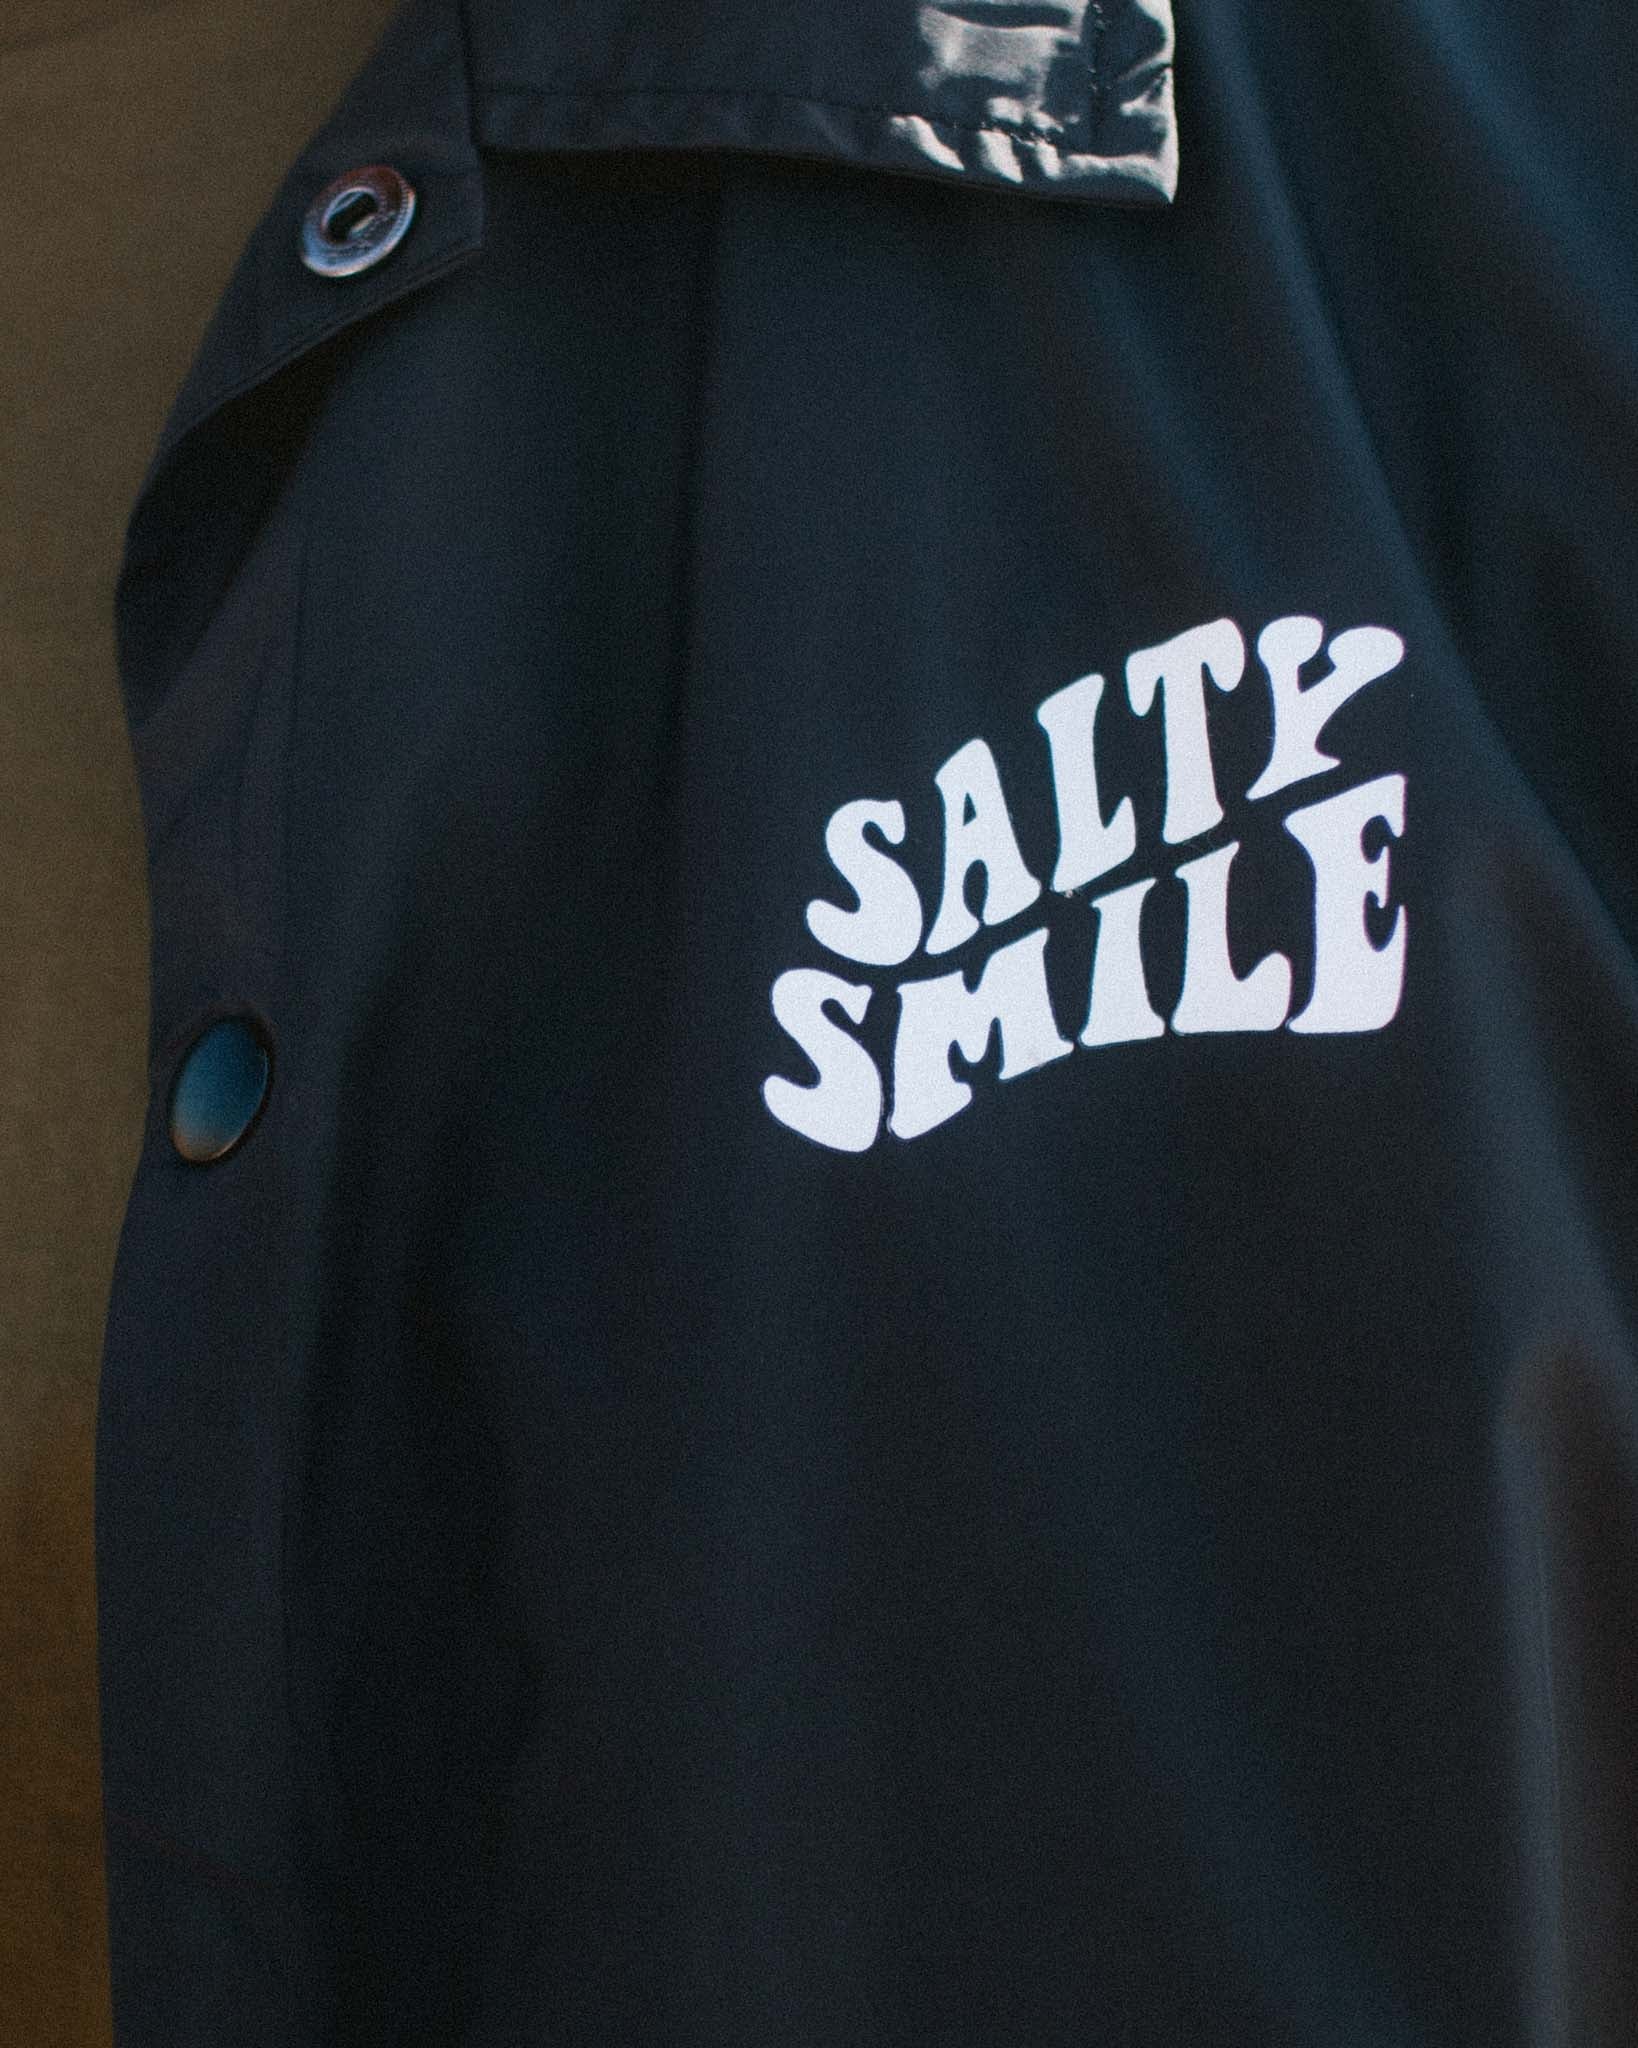 vetements surf salty smile COACH JACKET RECYCLED marque eco responsable